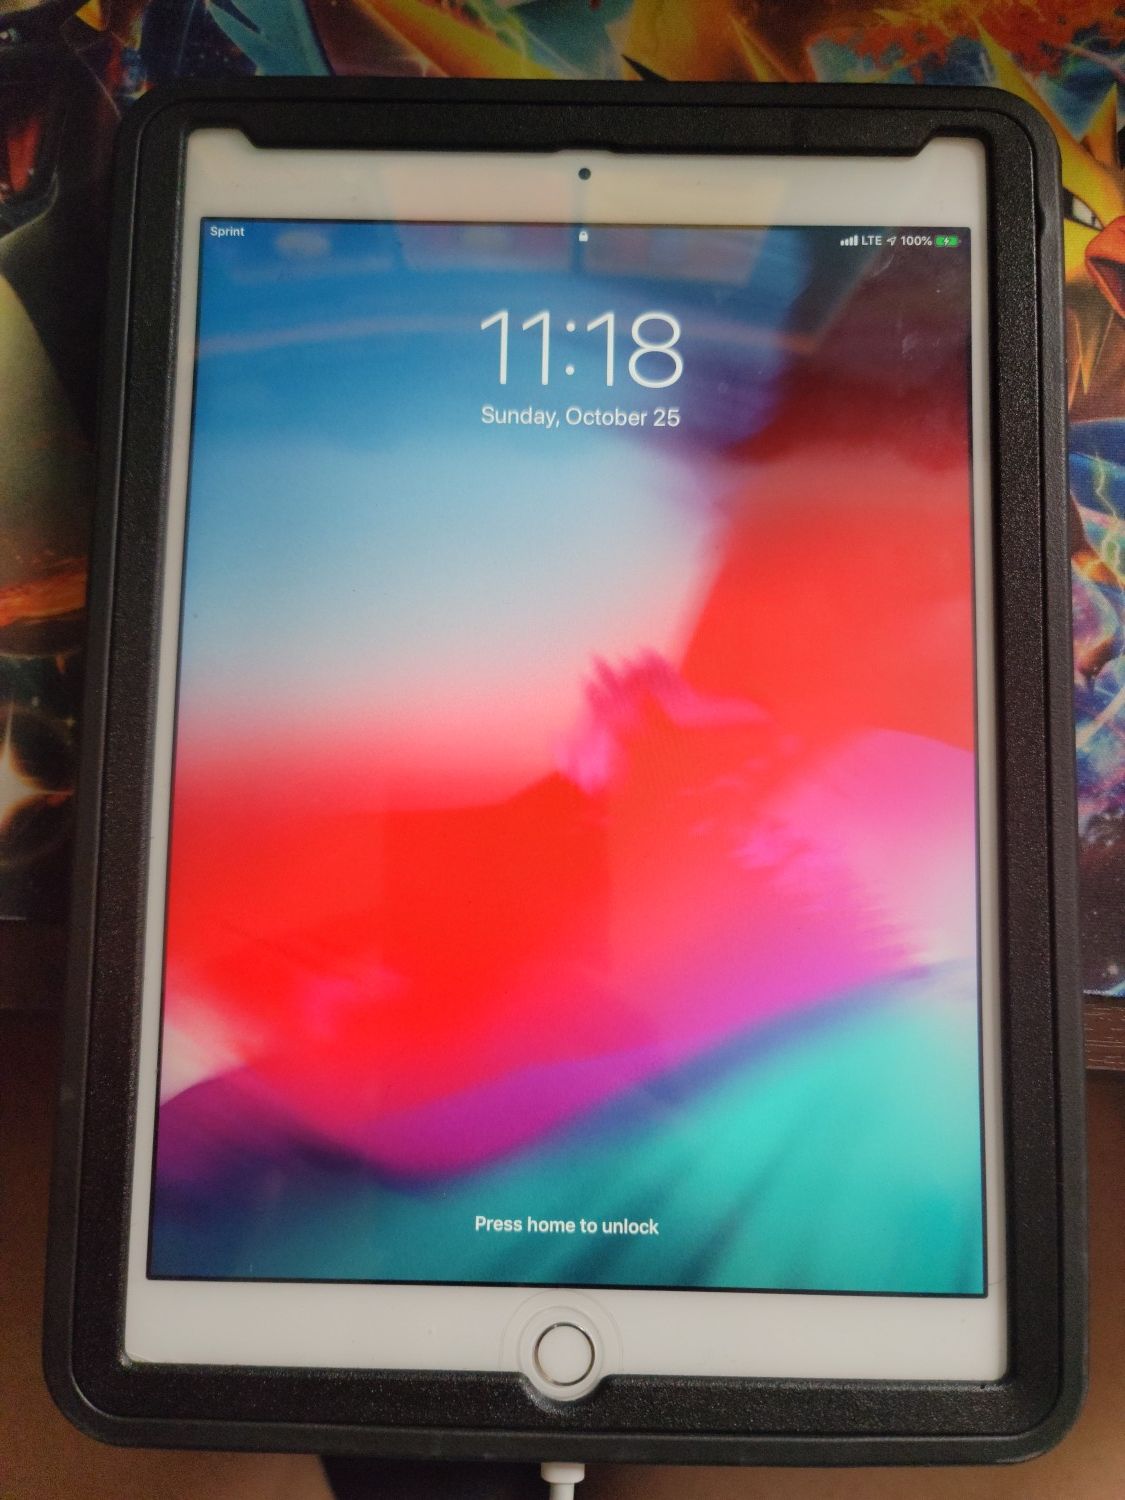 Ipad air 2 wifi and cellular sprint capable 16gb comes with case and charging cord